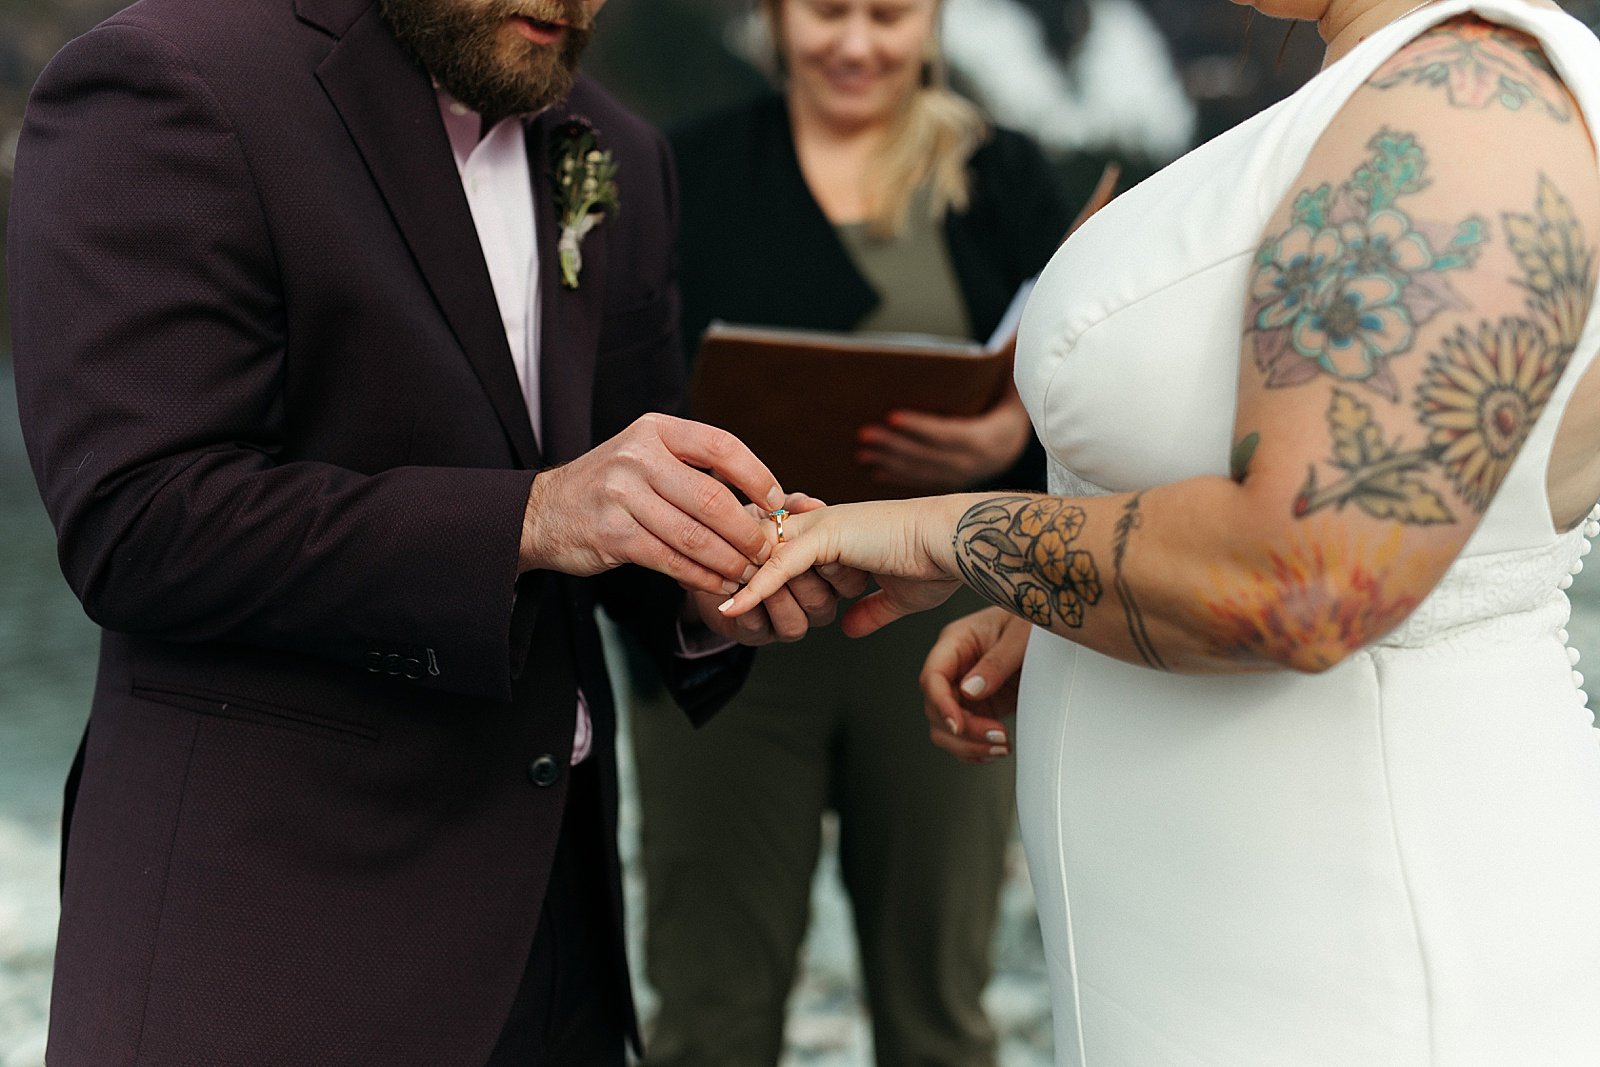  Bride and groom exchanging rings at their ceremony by Rachel Struve Photography 